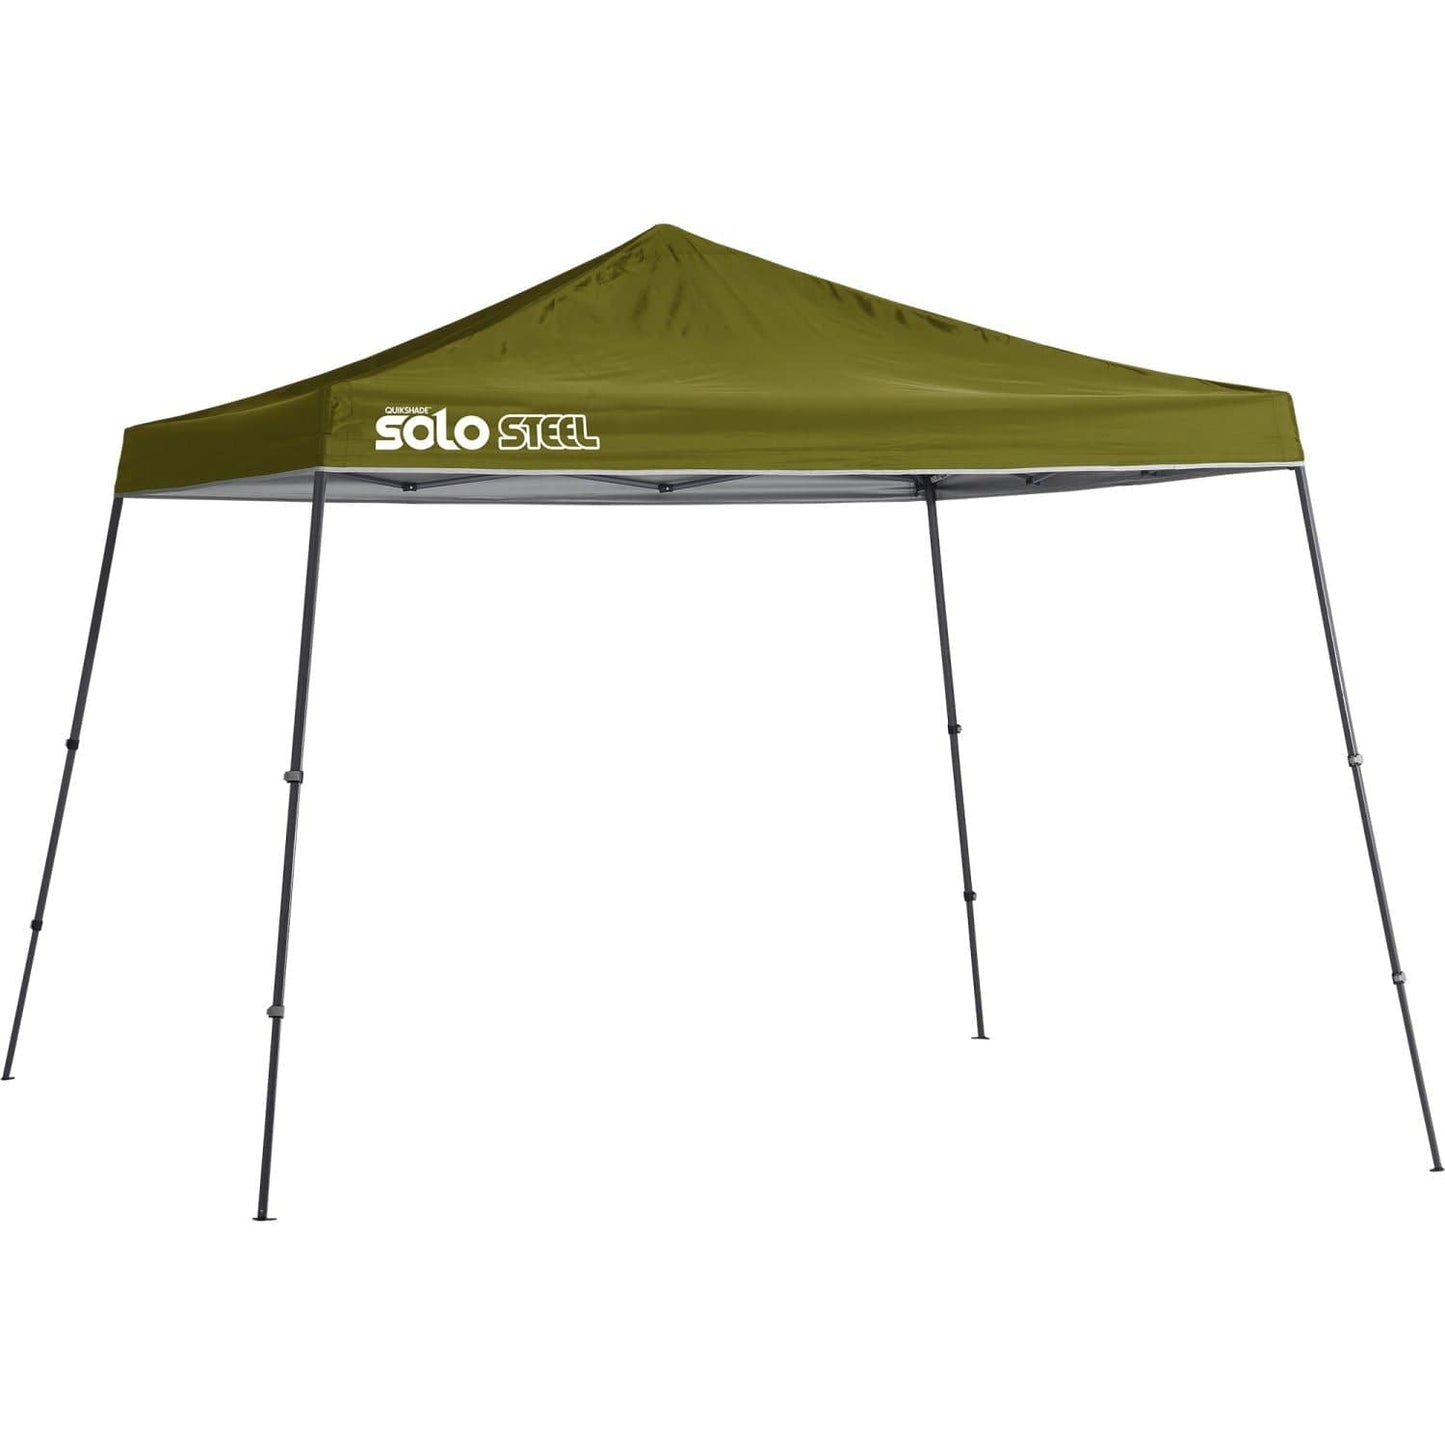 Quik Shade Pop Up Canopies Quik Shade | Solo Steel 90 11' x 11' Slant Leg Canopy - Olive 167548DS